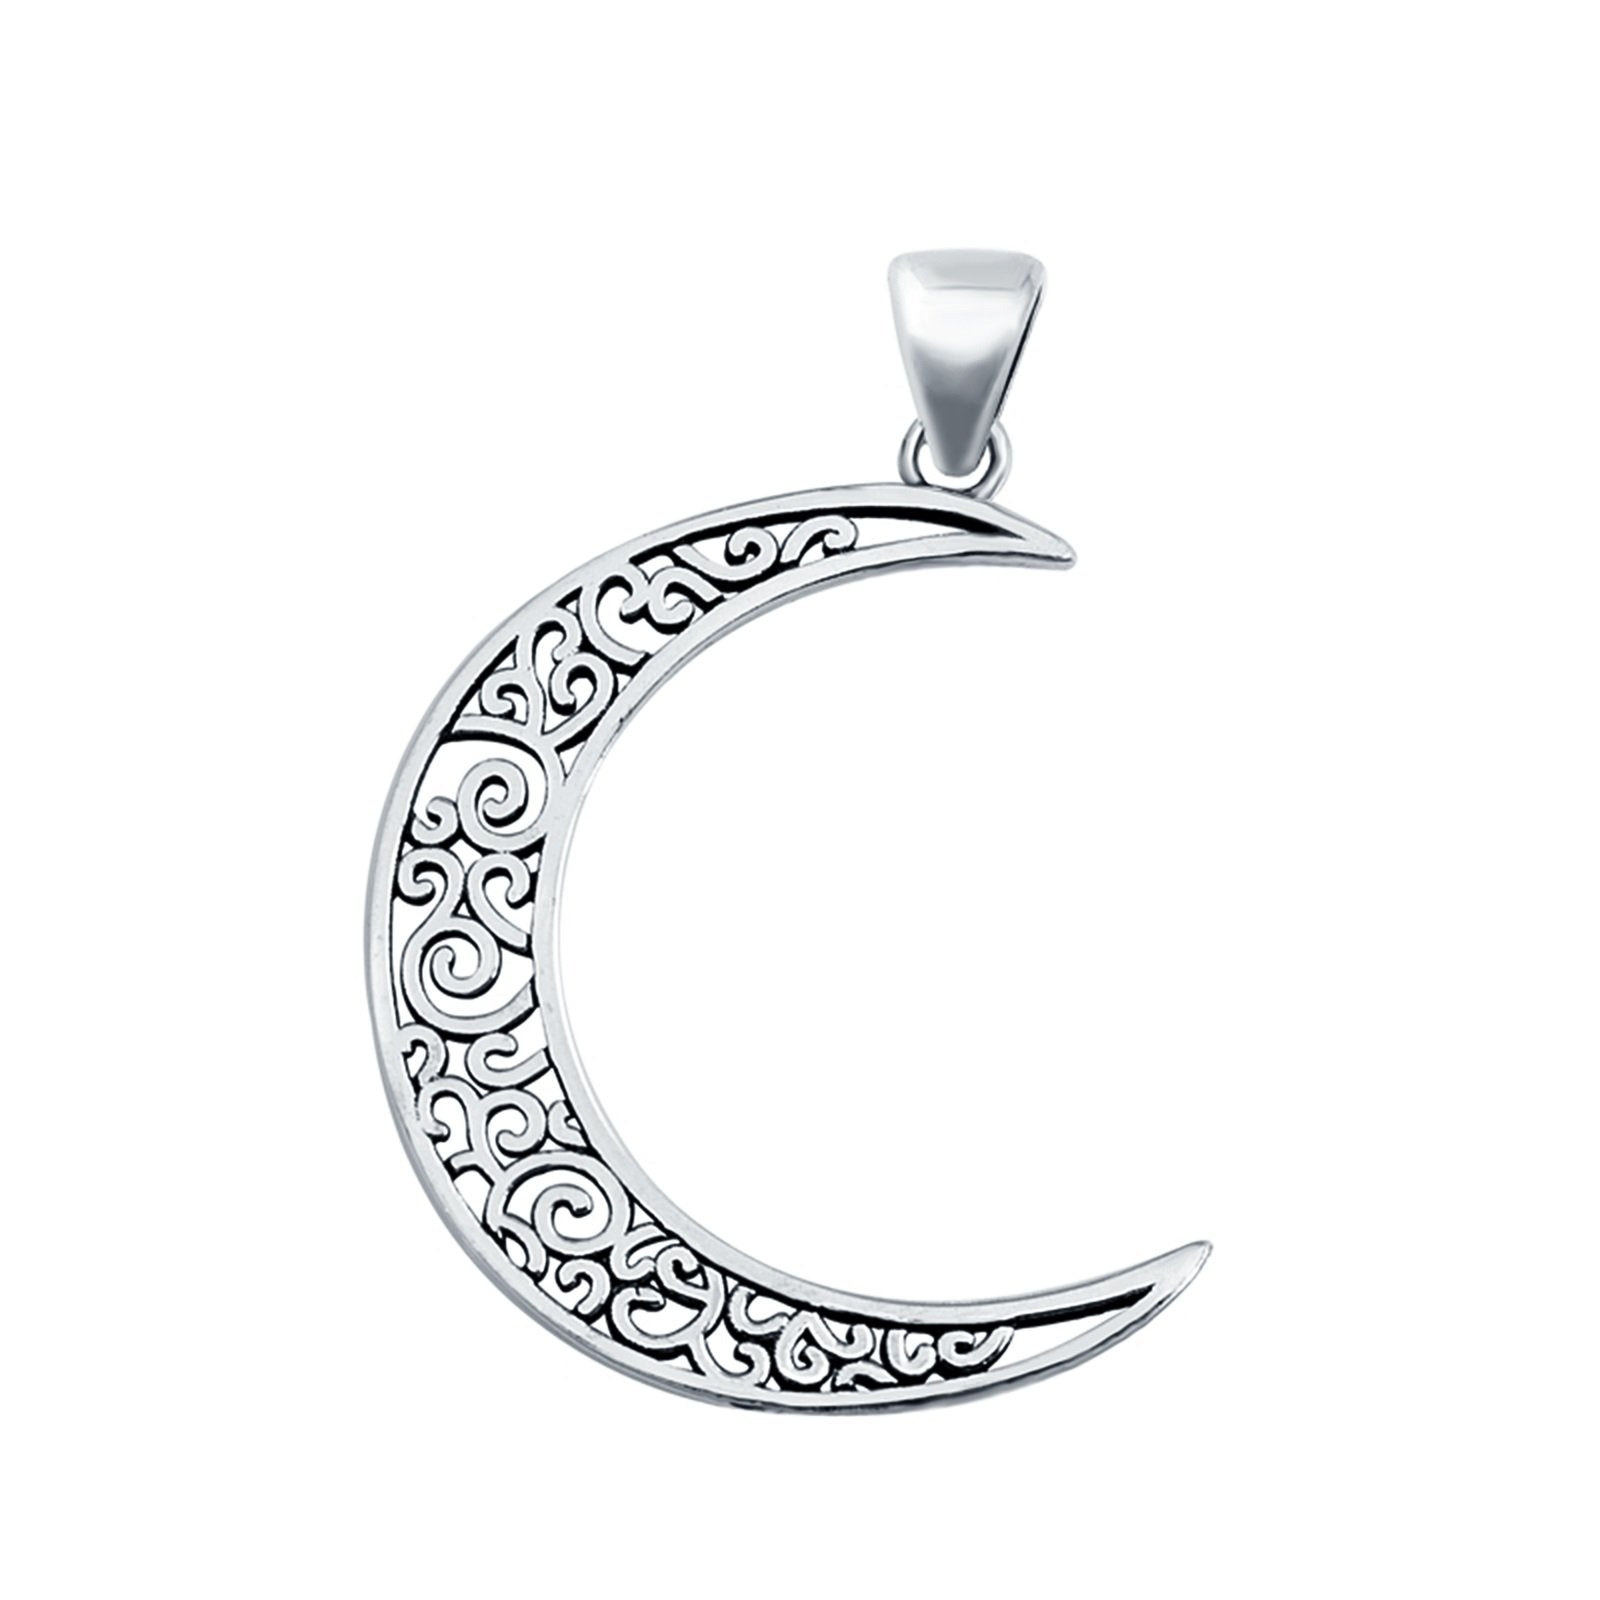 Crescent Moon Charm Pendant Round 925 Sterling Silver Fashion Jewelry